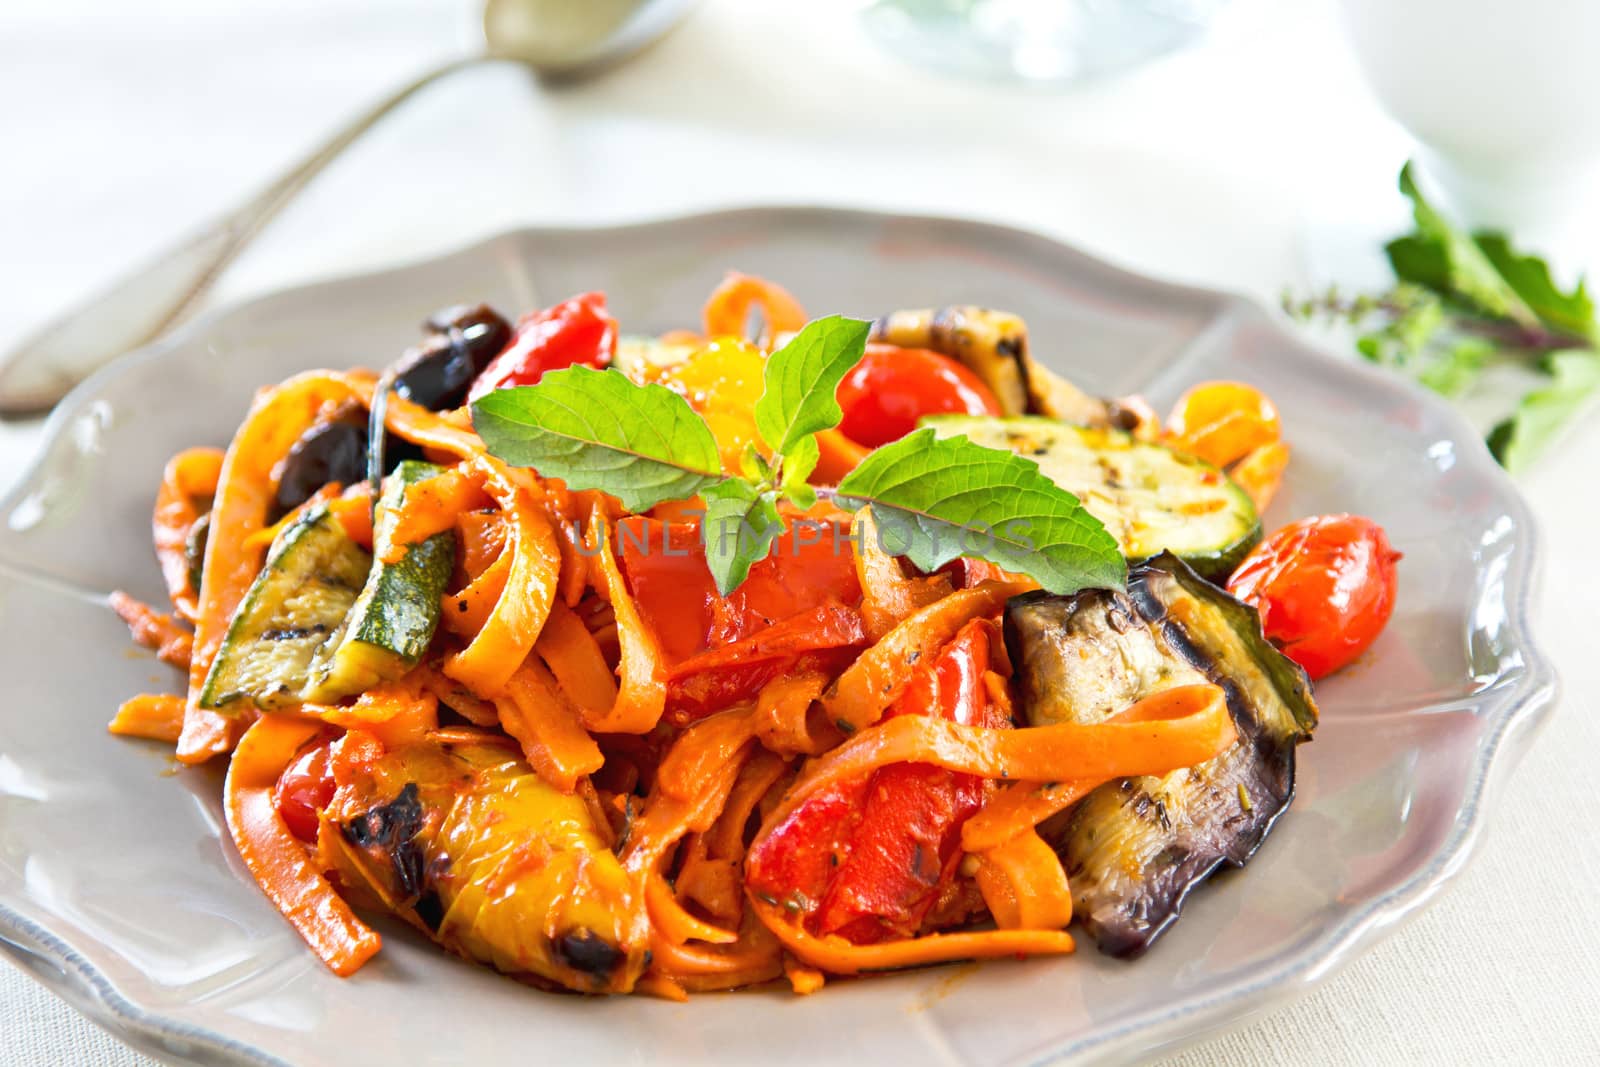 Fettuccine with grilled vegetables and tomato sauce